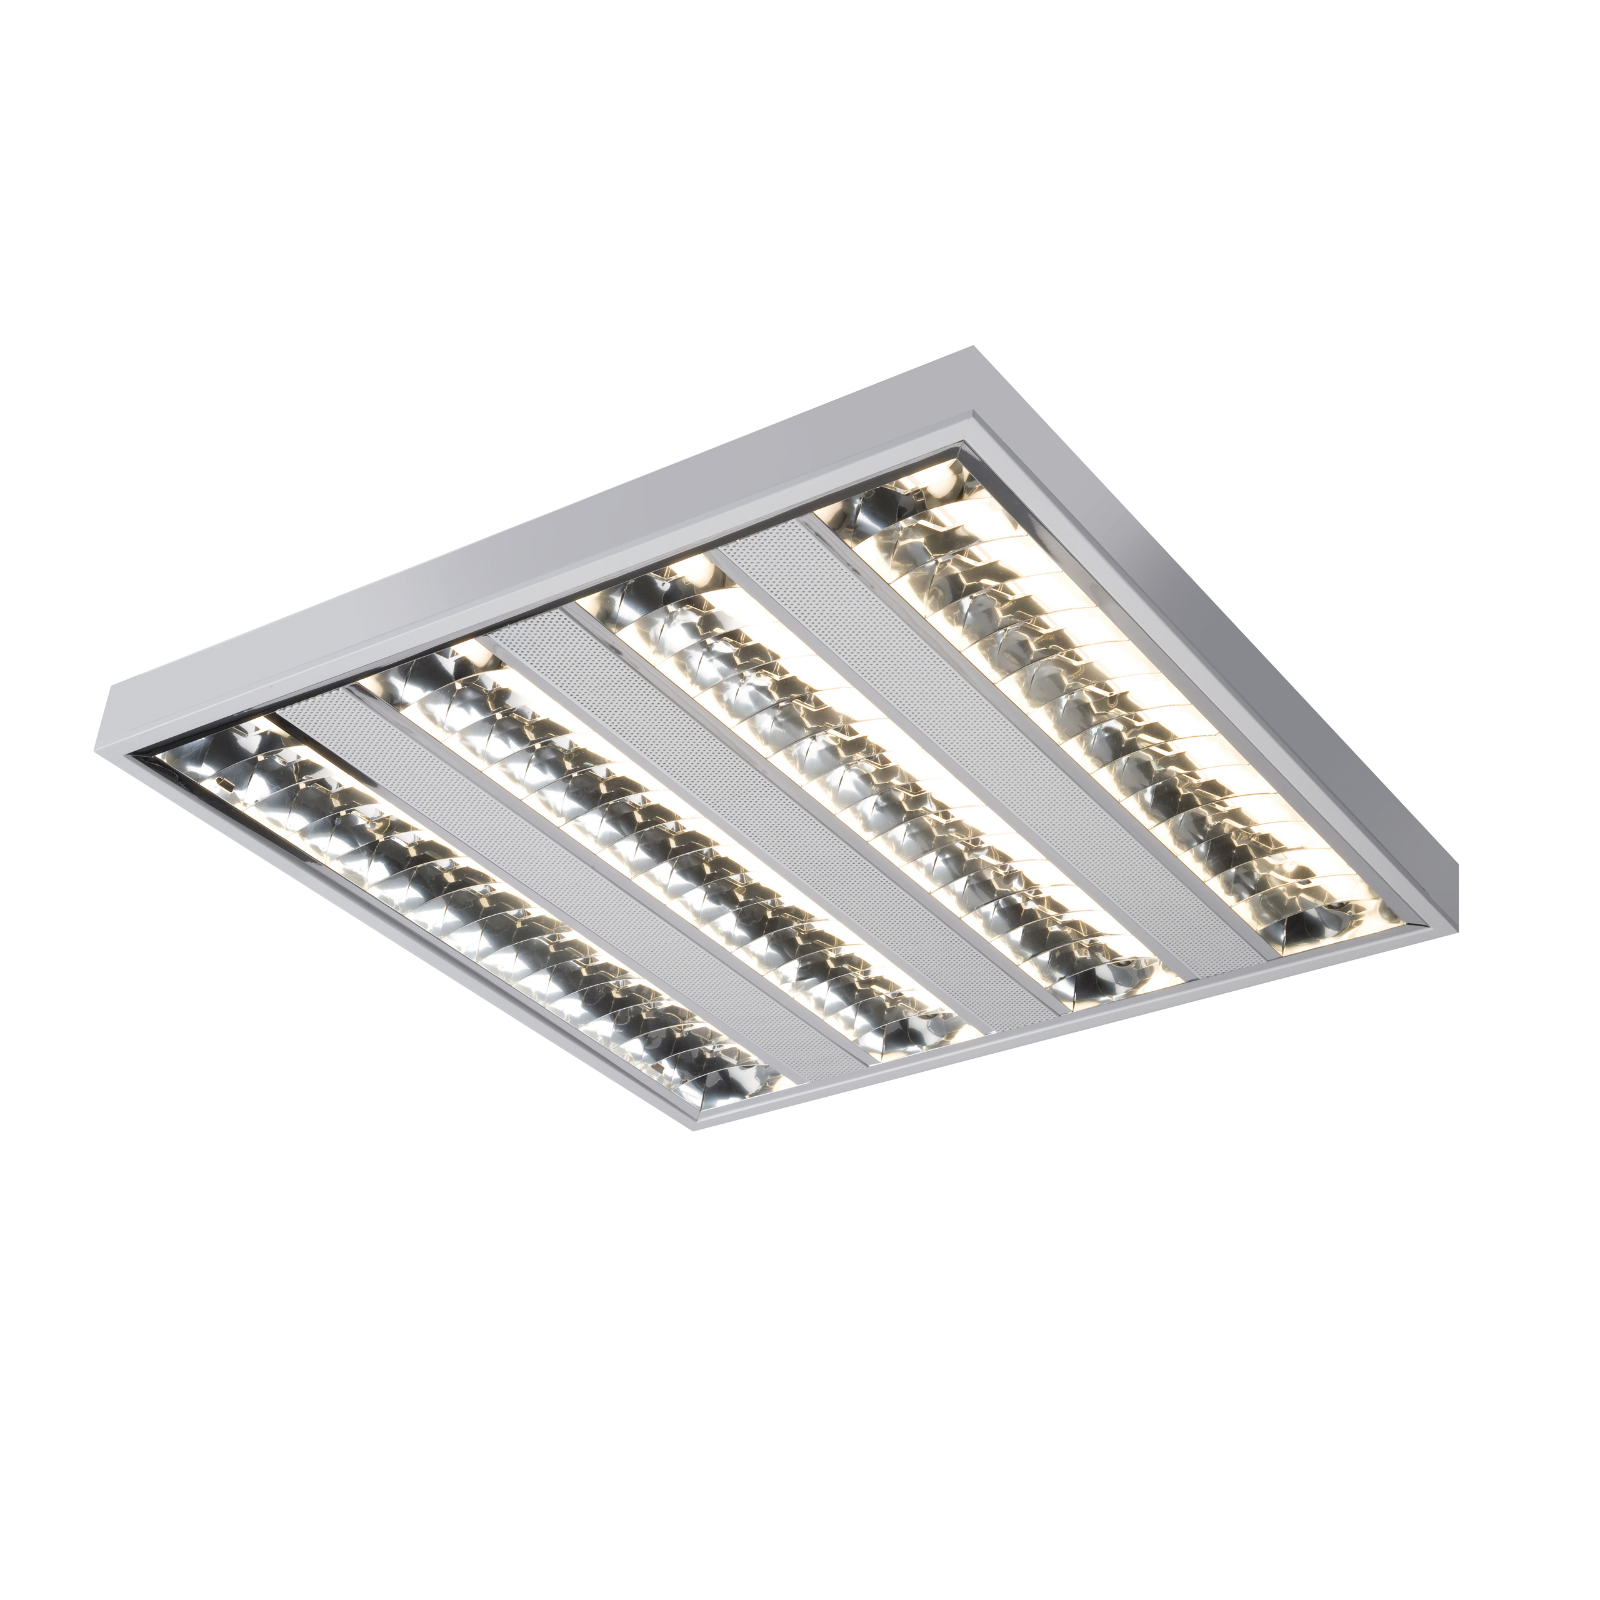 IP20 4x14W T5 Surface Mounted Fluorescent Fitting 595x595x75mm - SURF414HF 